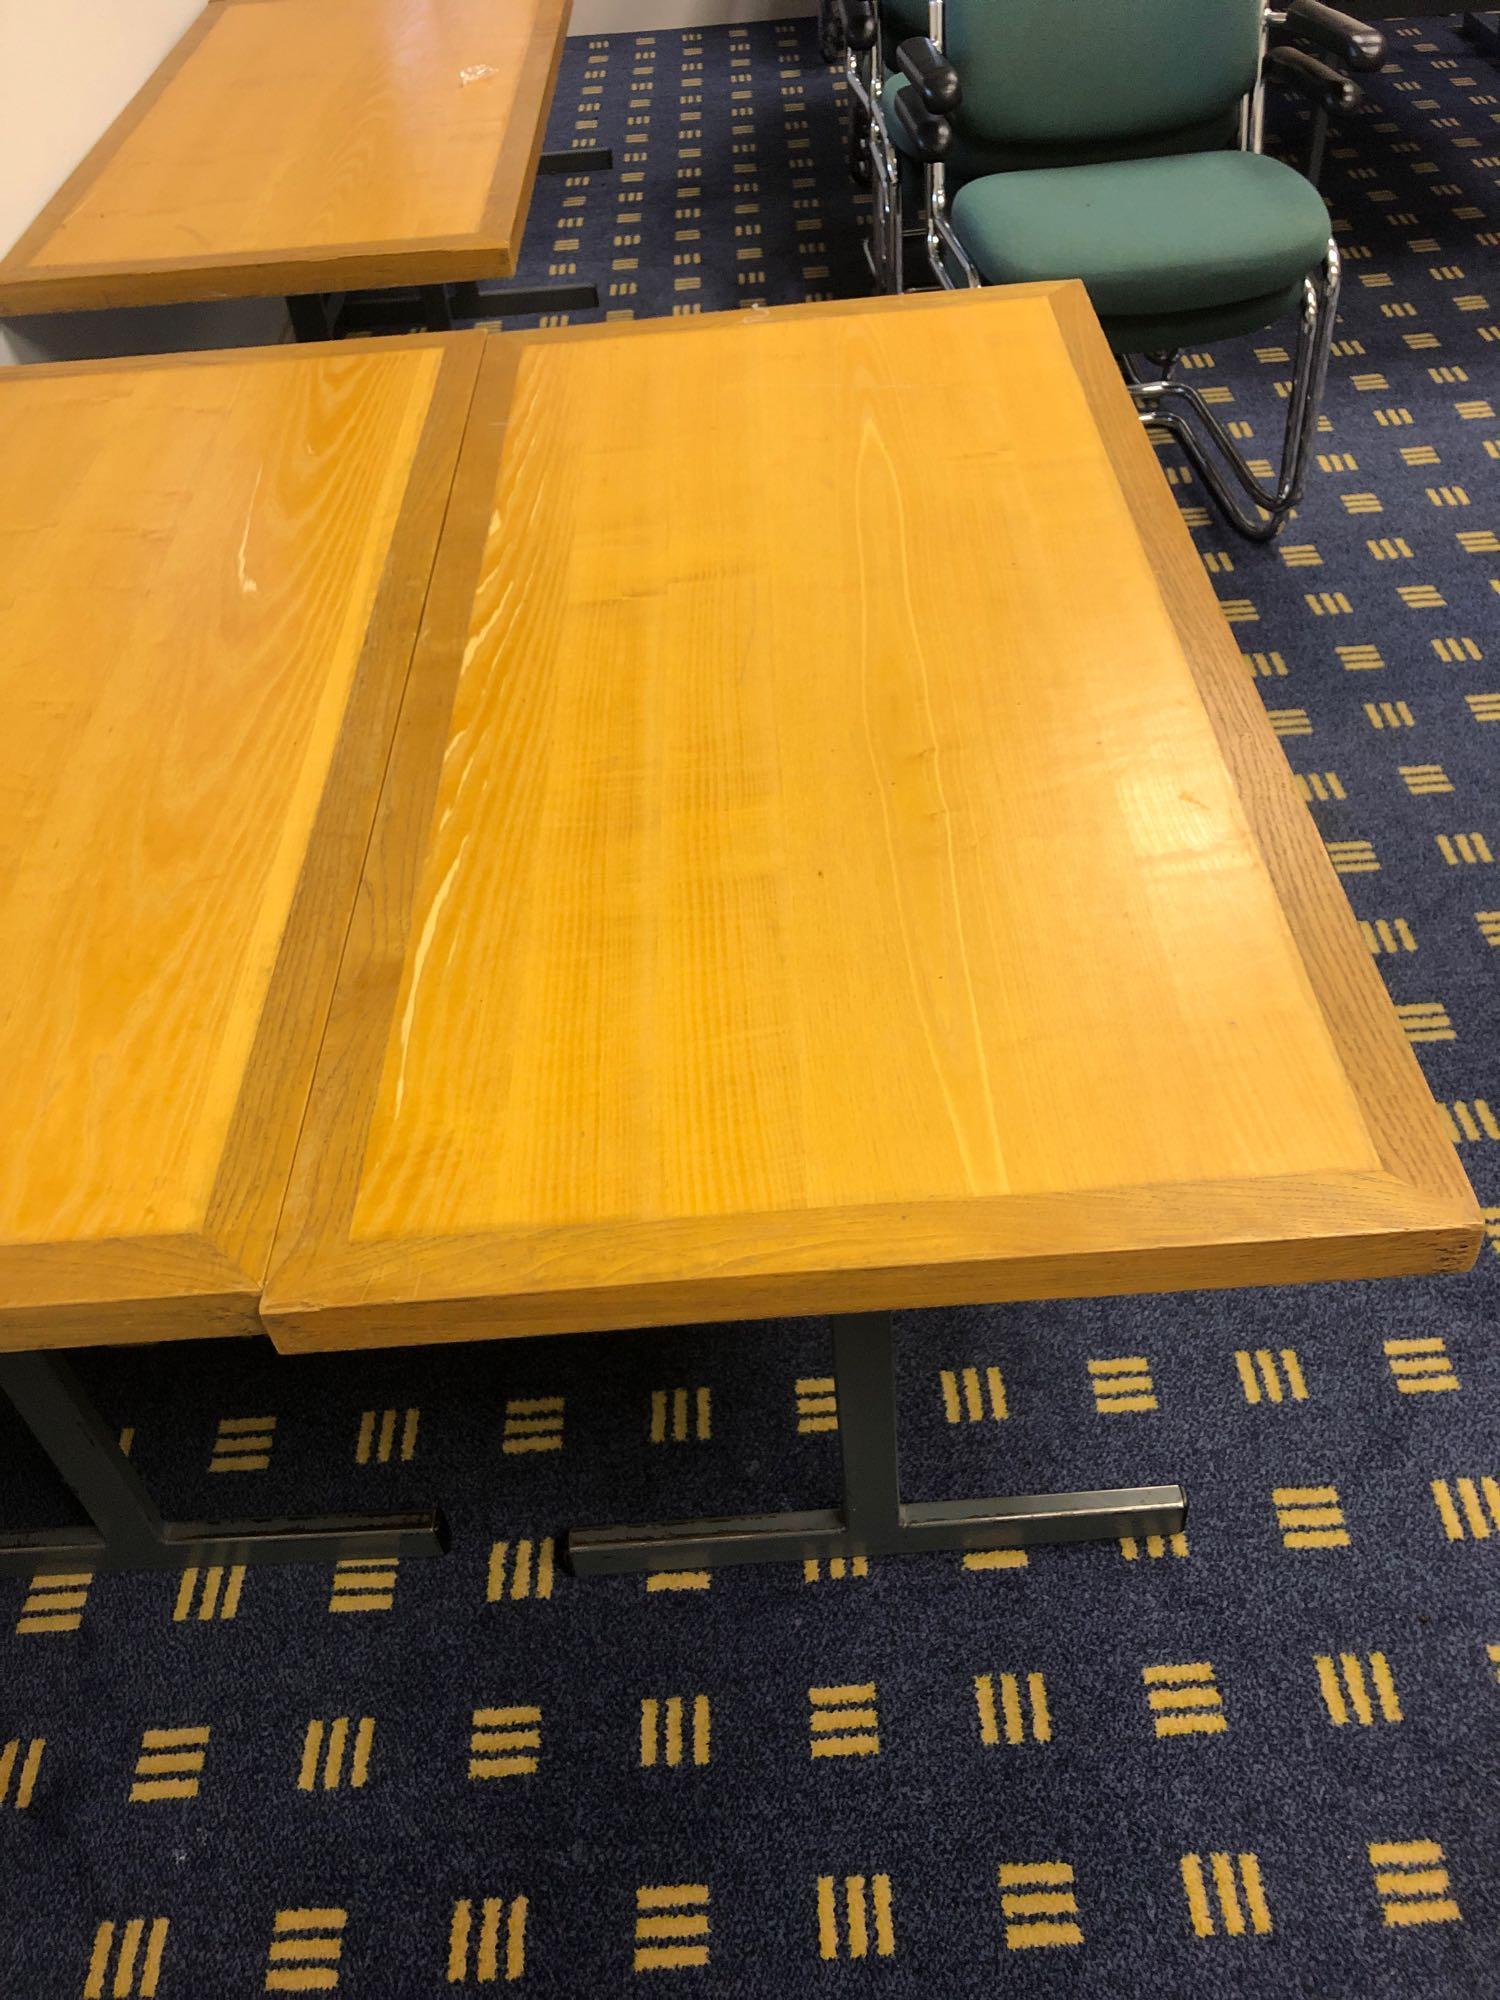 6x Wooden Conference Tables - Image 2 of 2